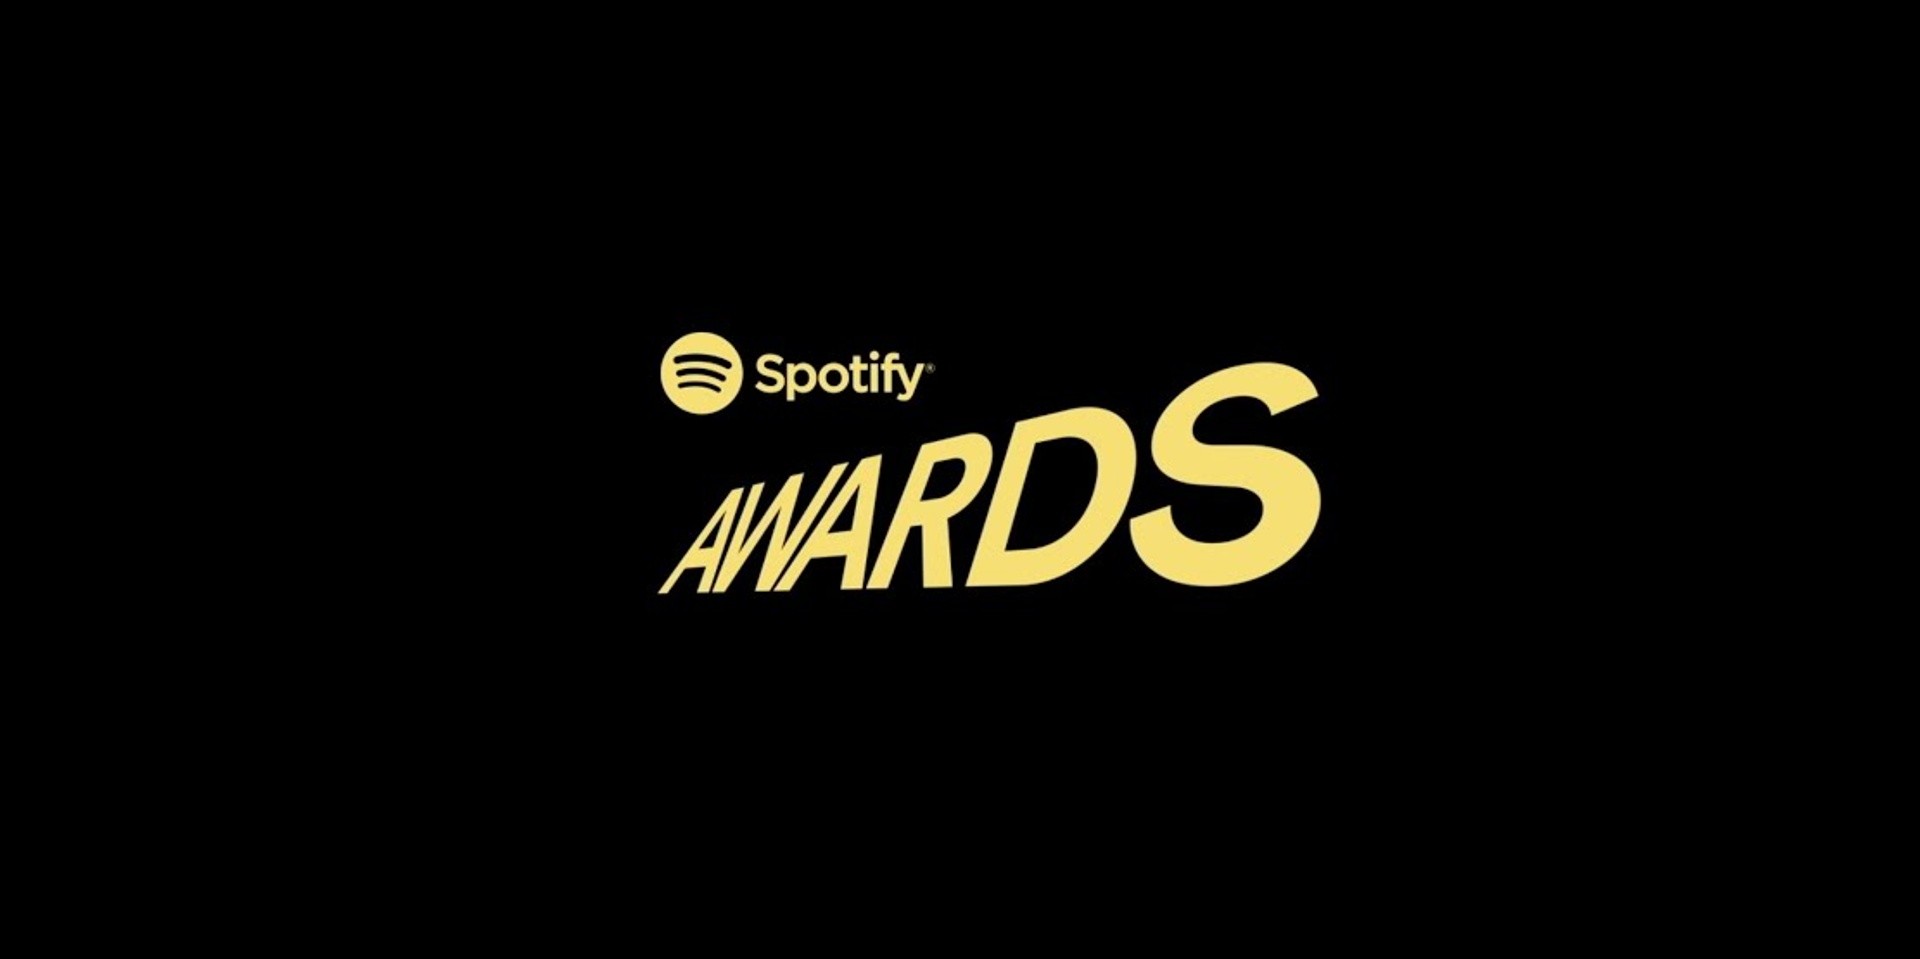 Spotify announces its own awards show 